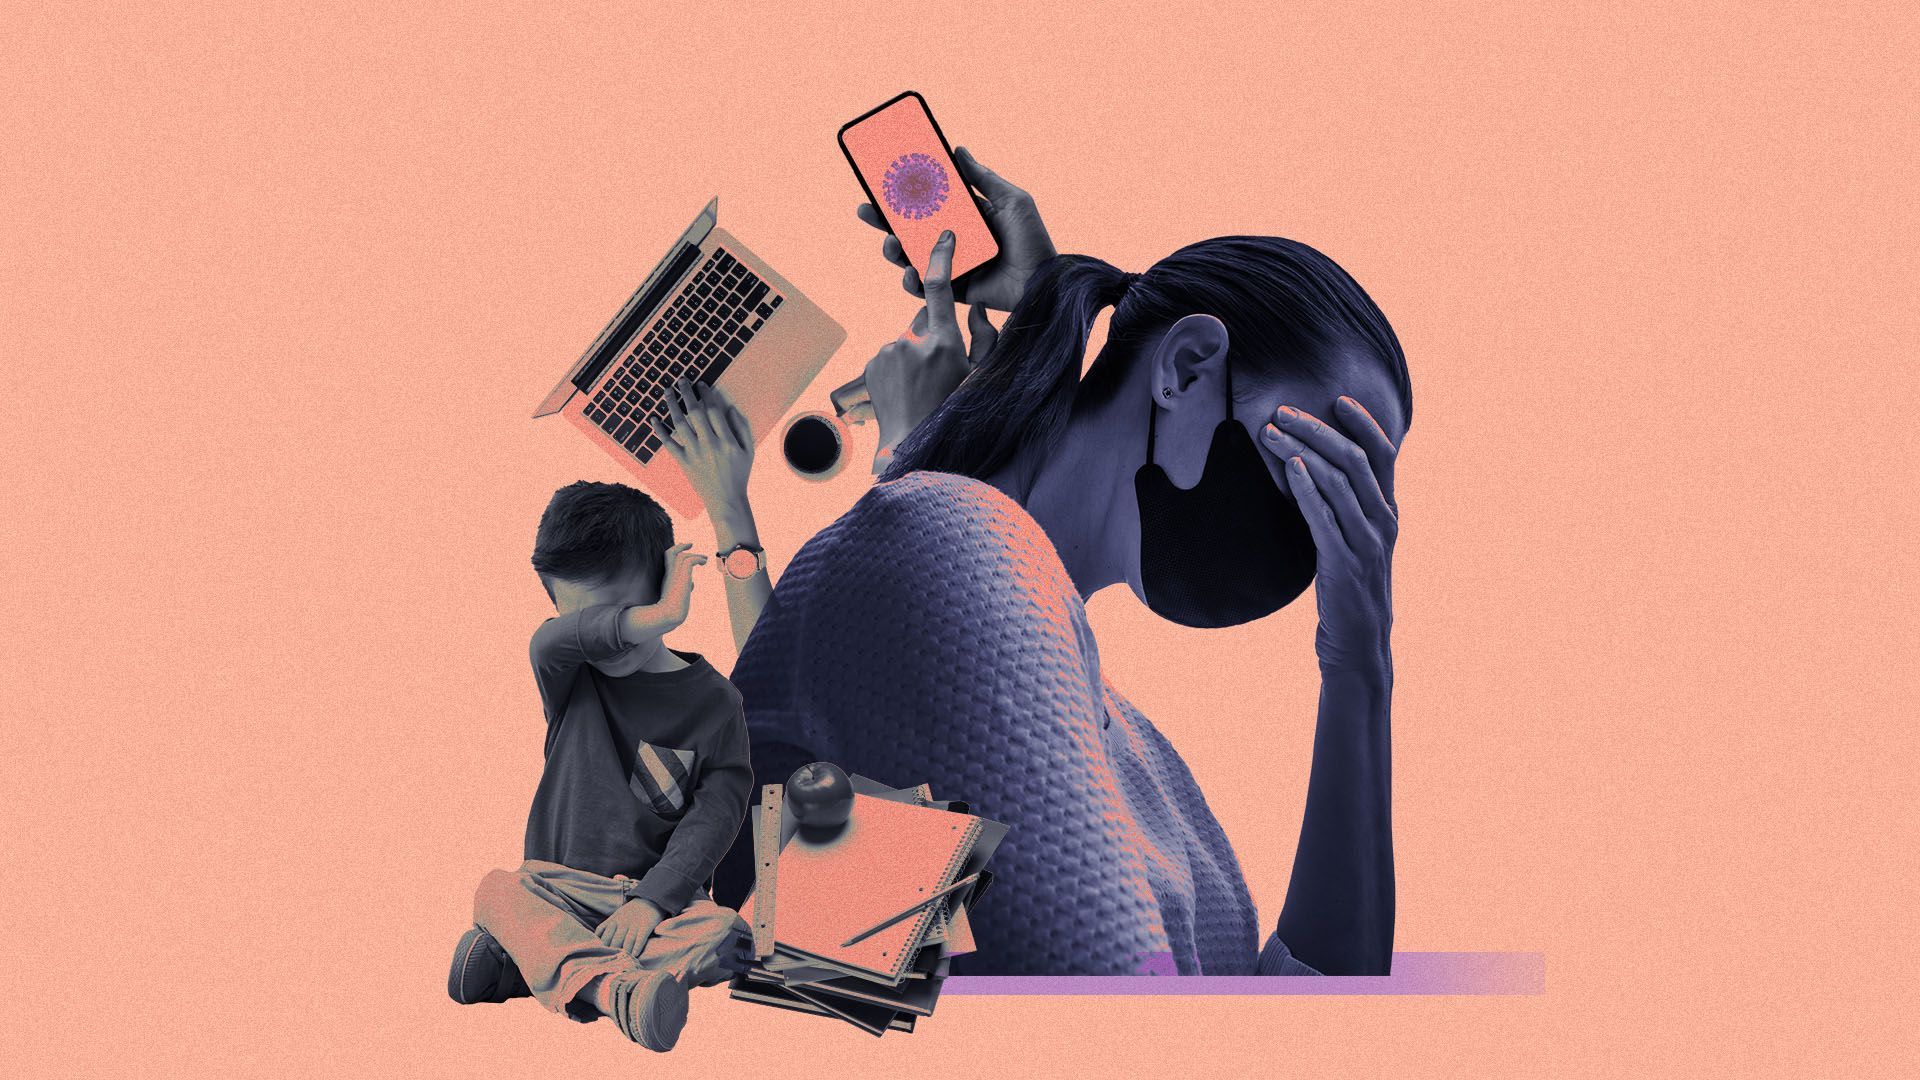 Illustrated collage of a stressed woman with mask on surrounded by school books, a crying child, a laptop, and a cell phone with a virus image on the screen